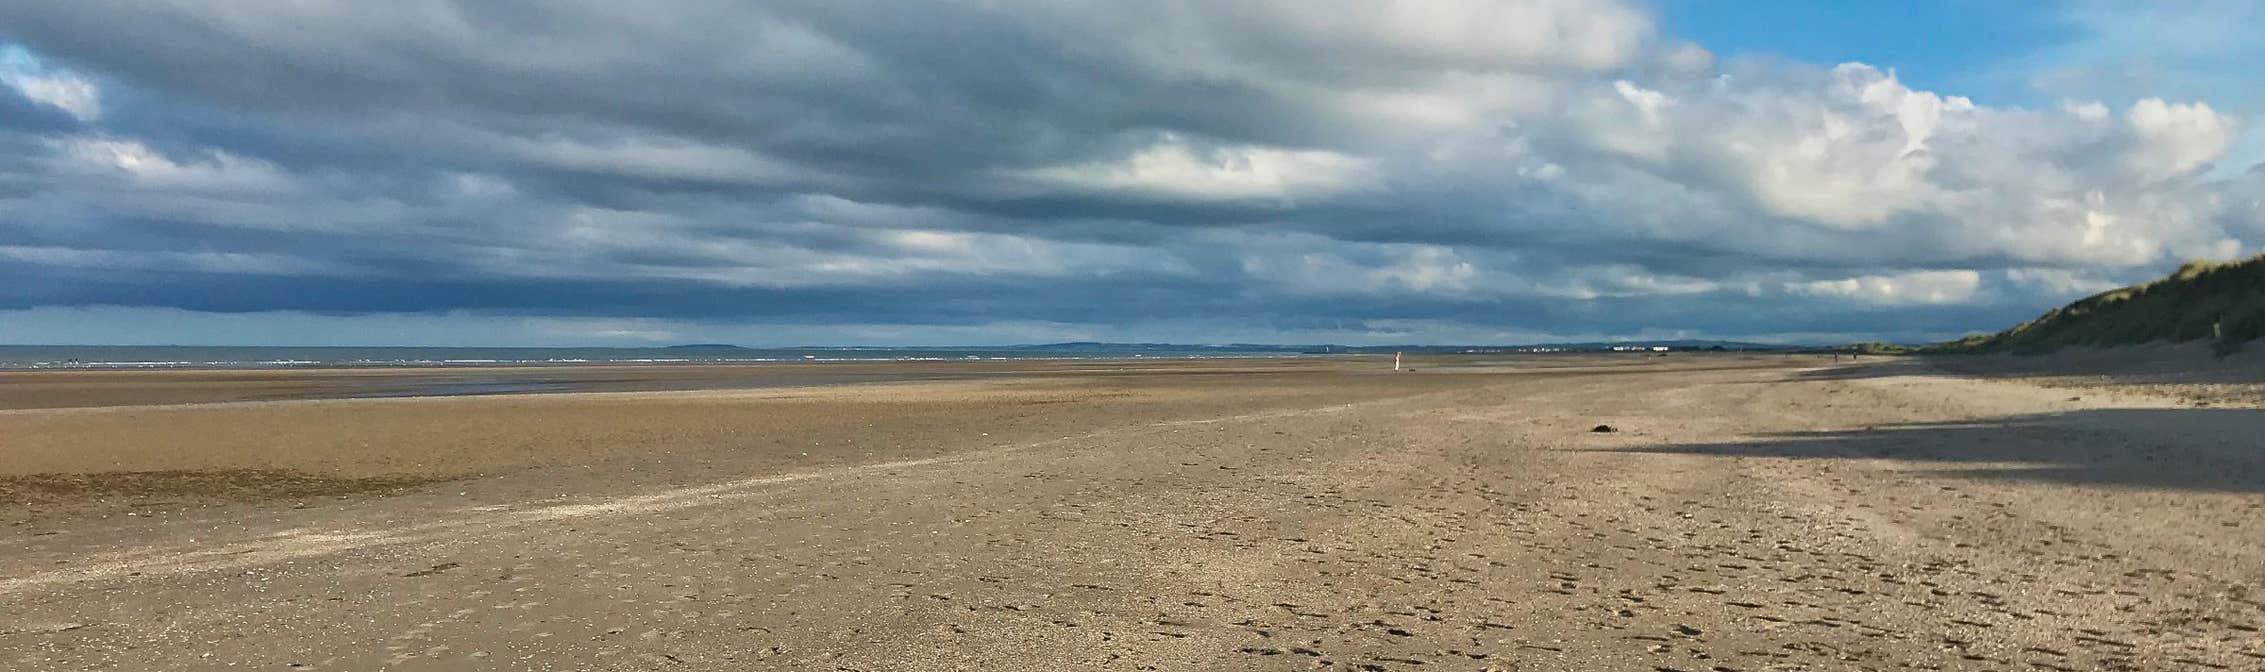 Image of a beach in Termonfeckin in County Louth